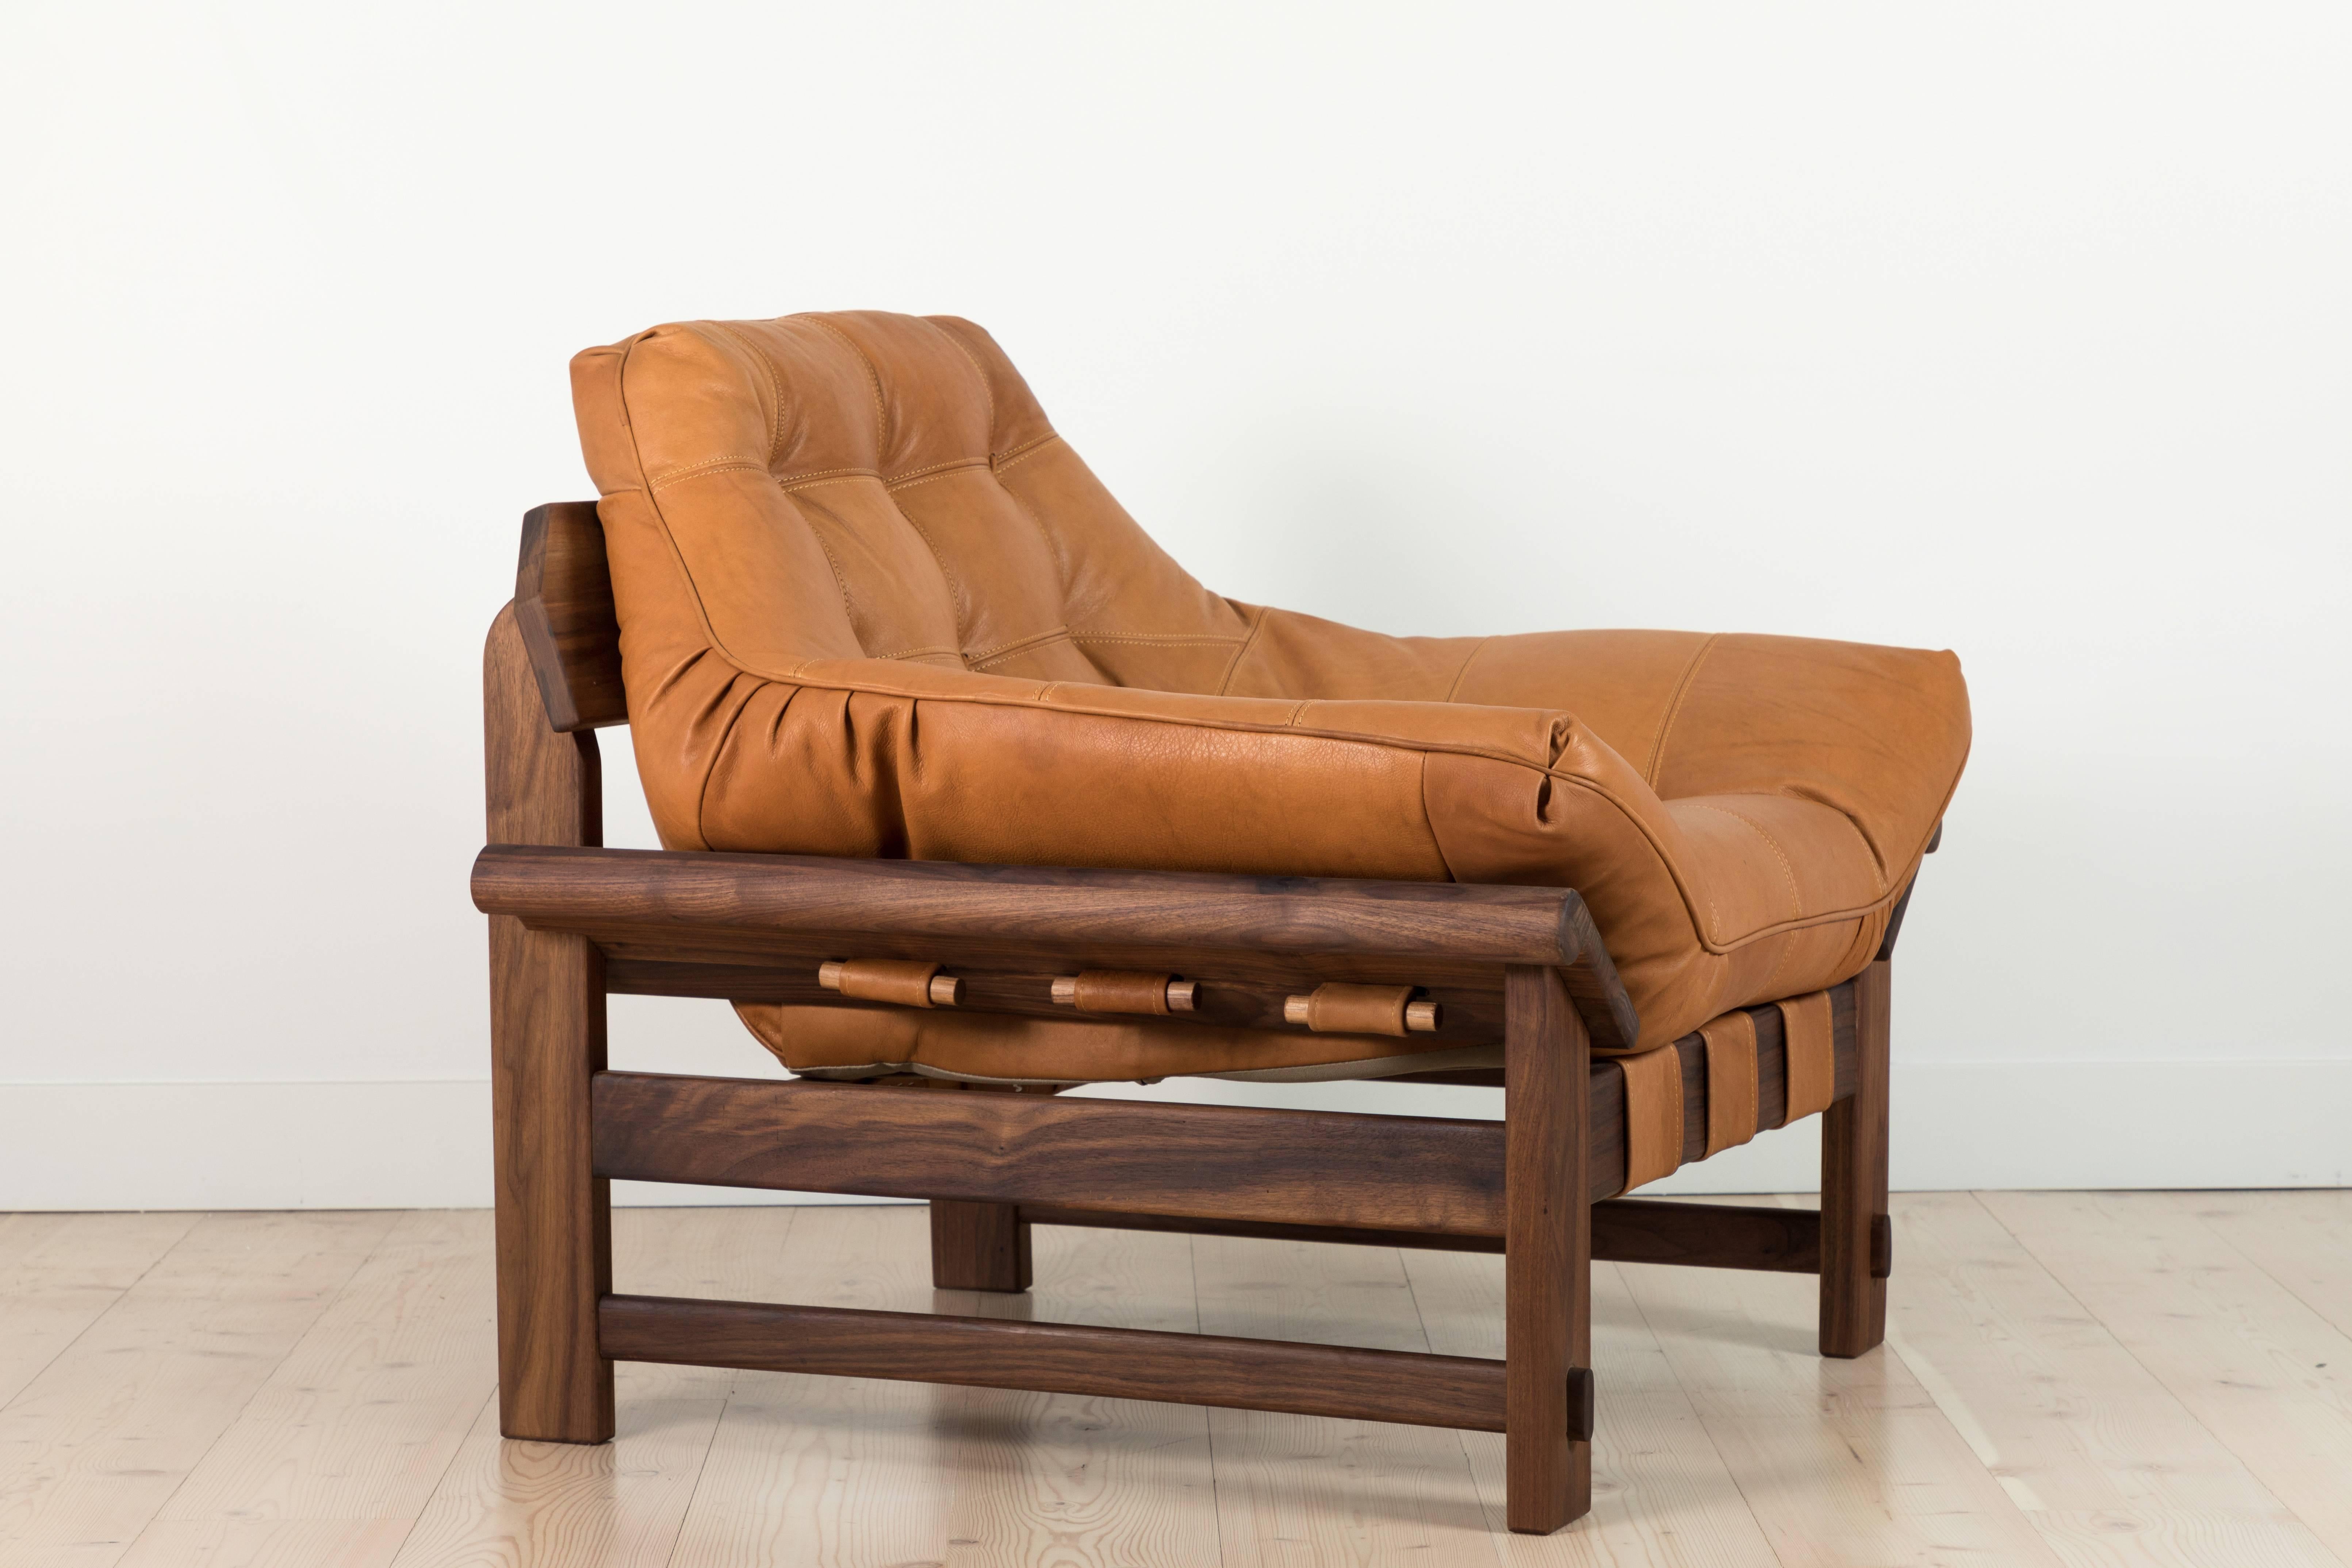 Pair of Leather and Oiled Walnut Ojai Lounge Chairs by Lawson-Fenning 1